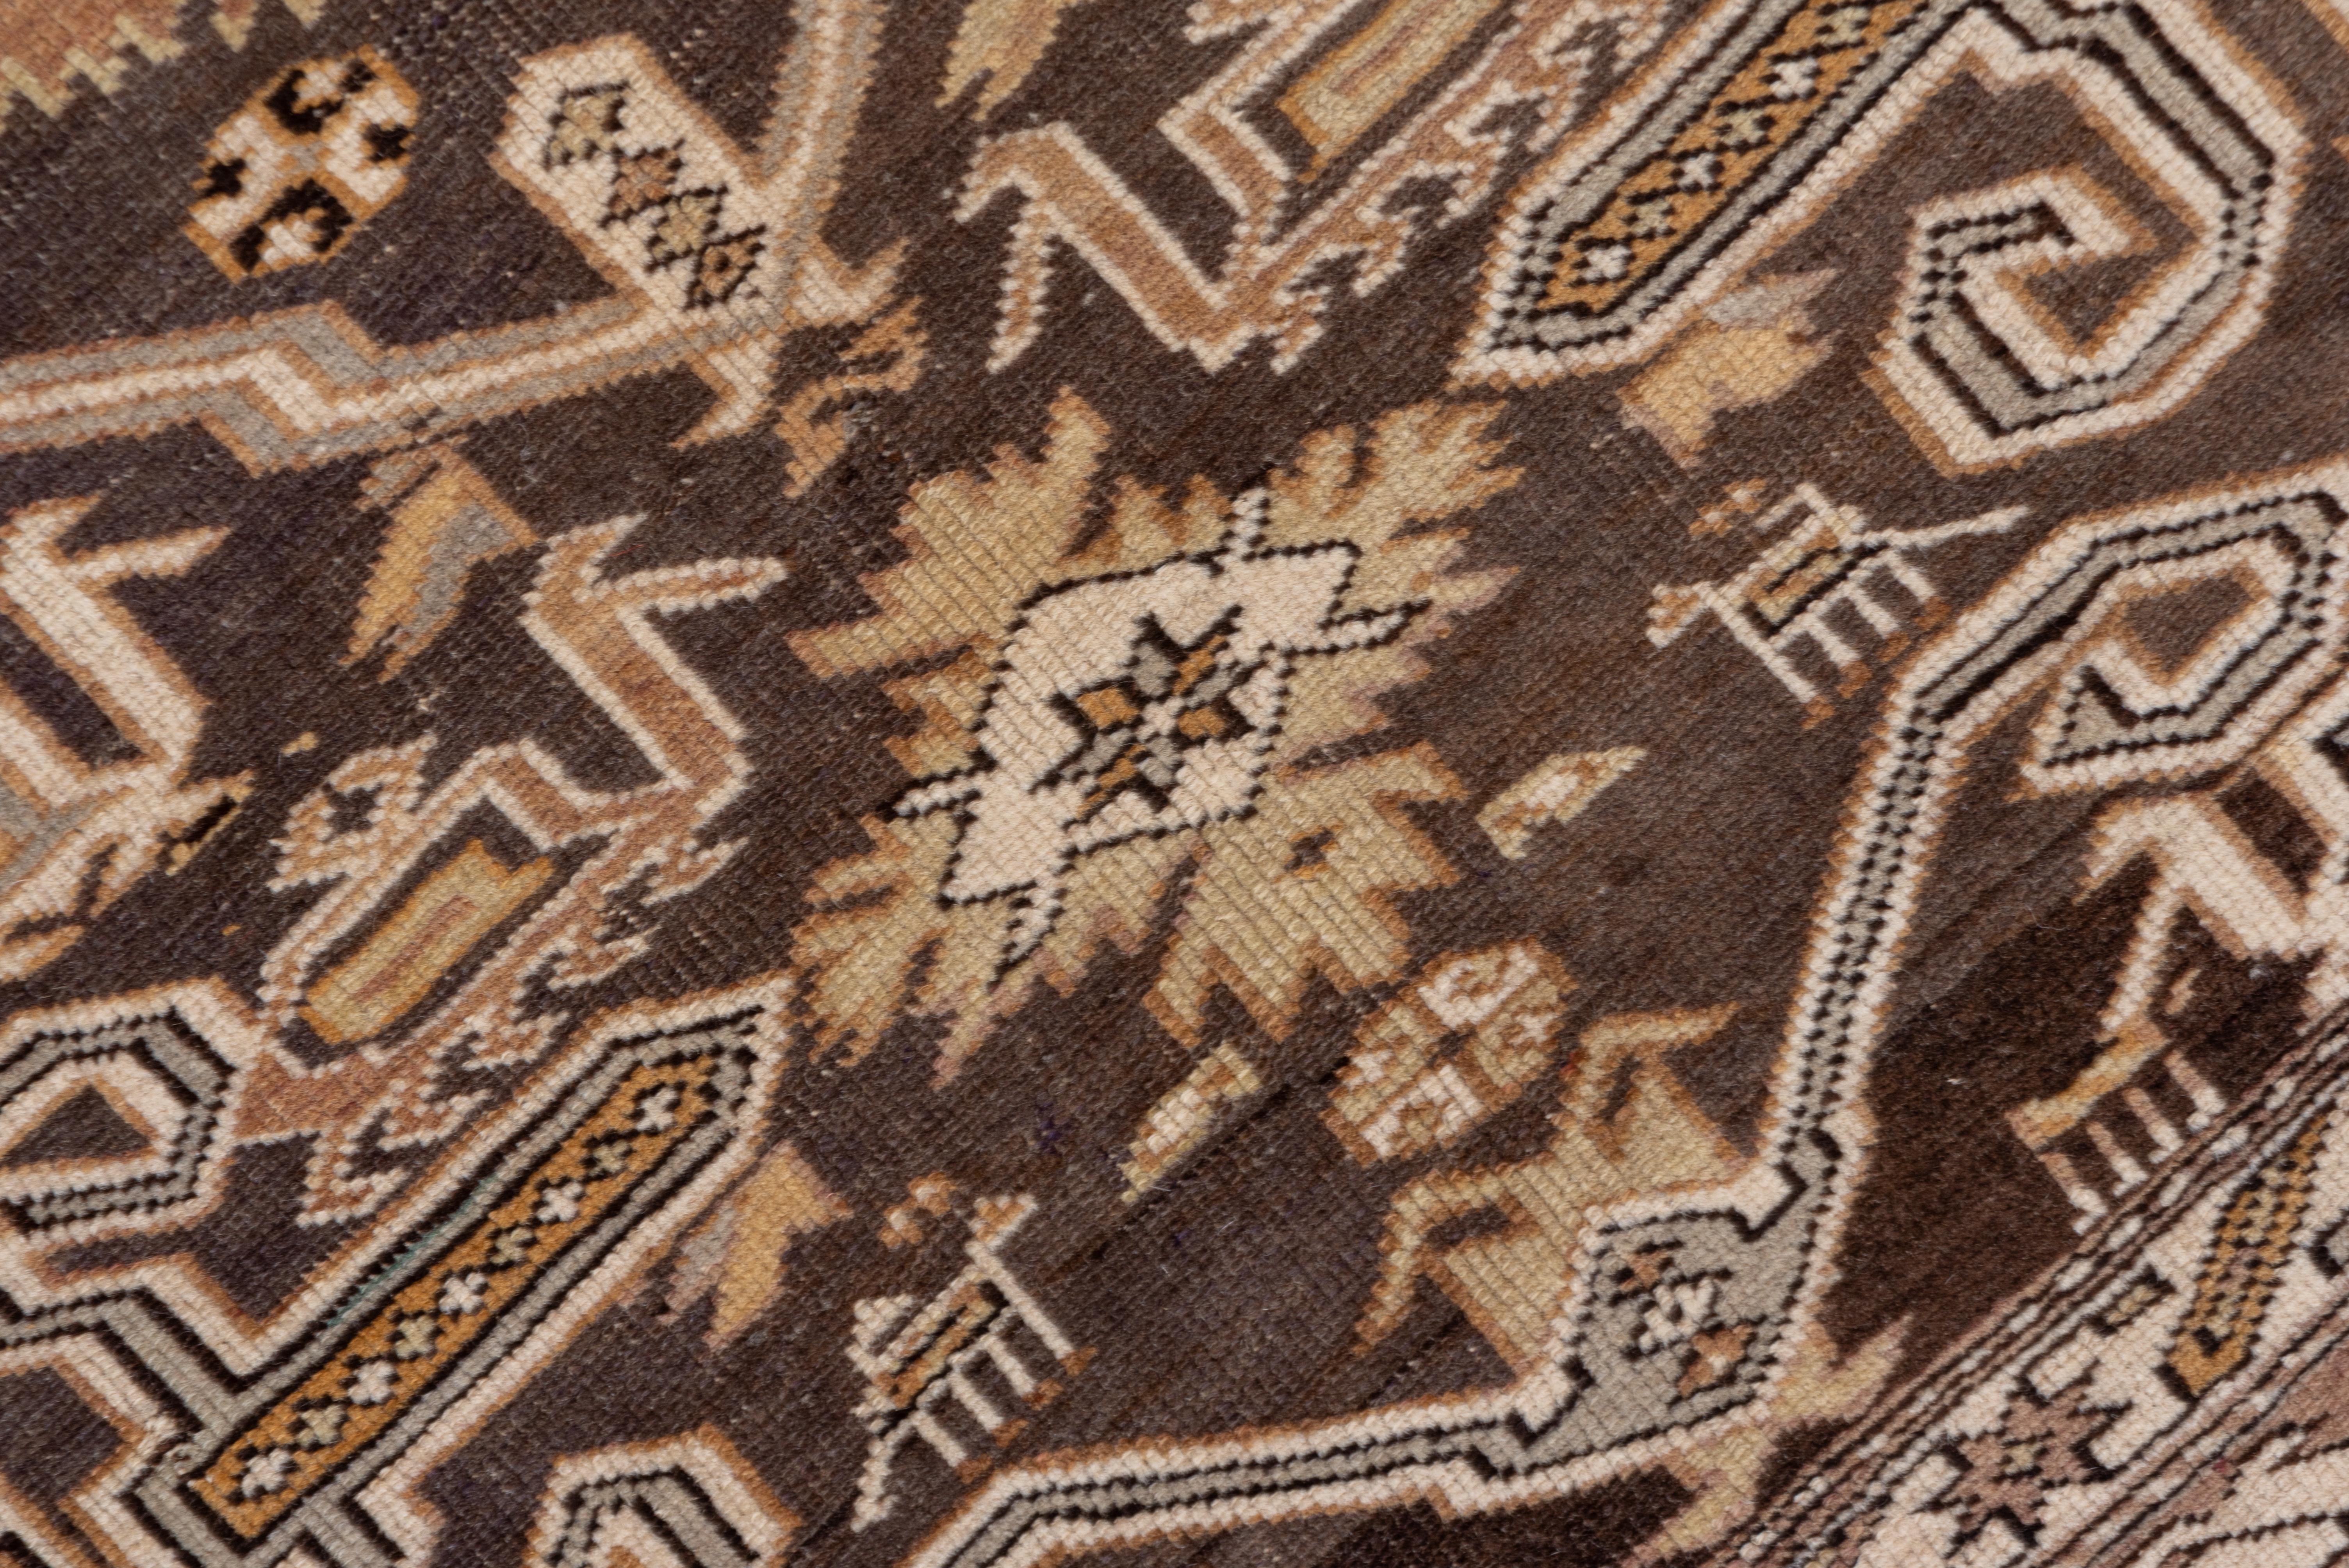 This east Caucasian scatter has the characteristic rams' horns pattern on the abrashed brown field, with peacocks and tiny animals mixed in with larger stars, rosettes and volute V's. The six geometric borders include a keyhole reciprocal, slanted